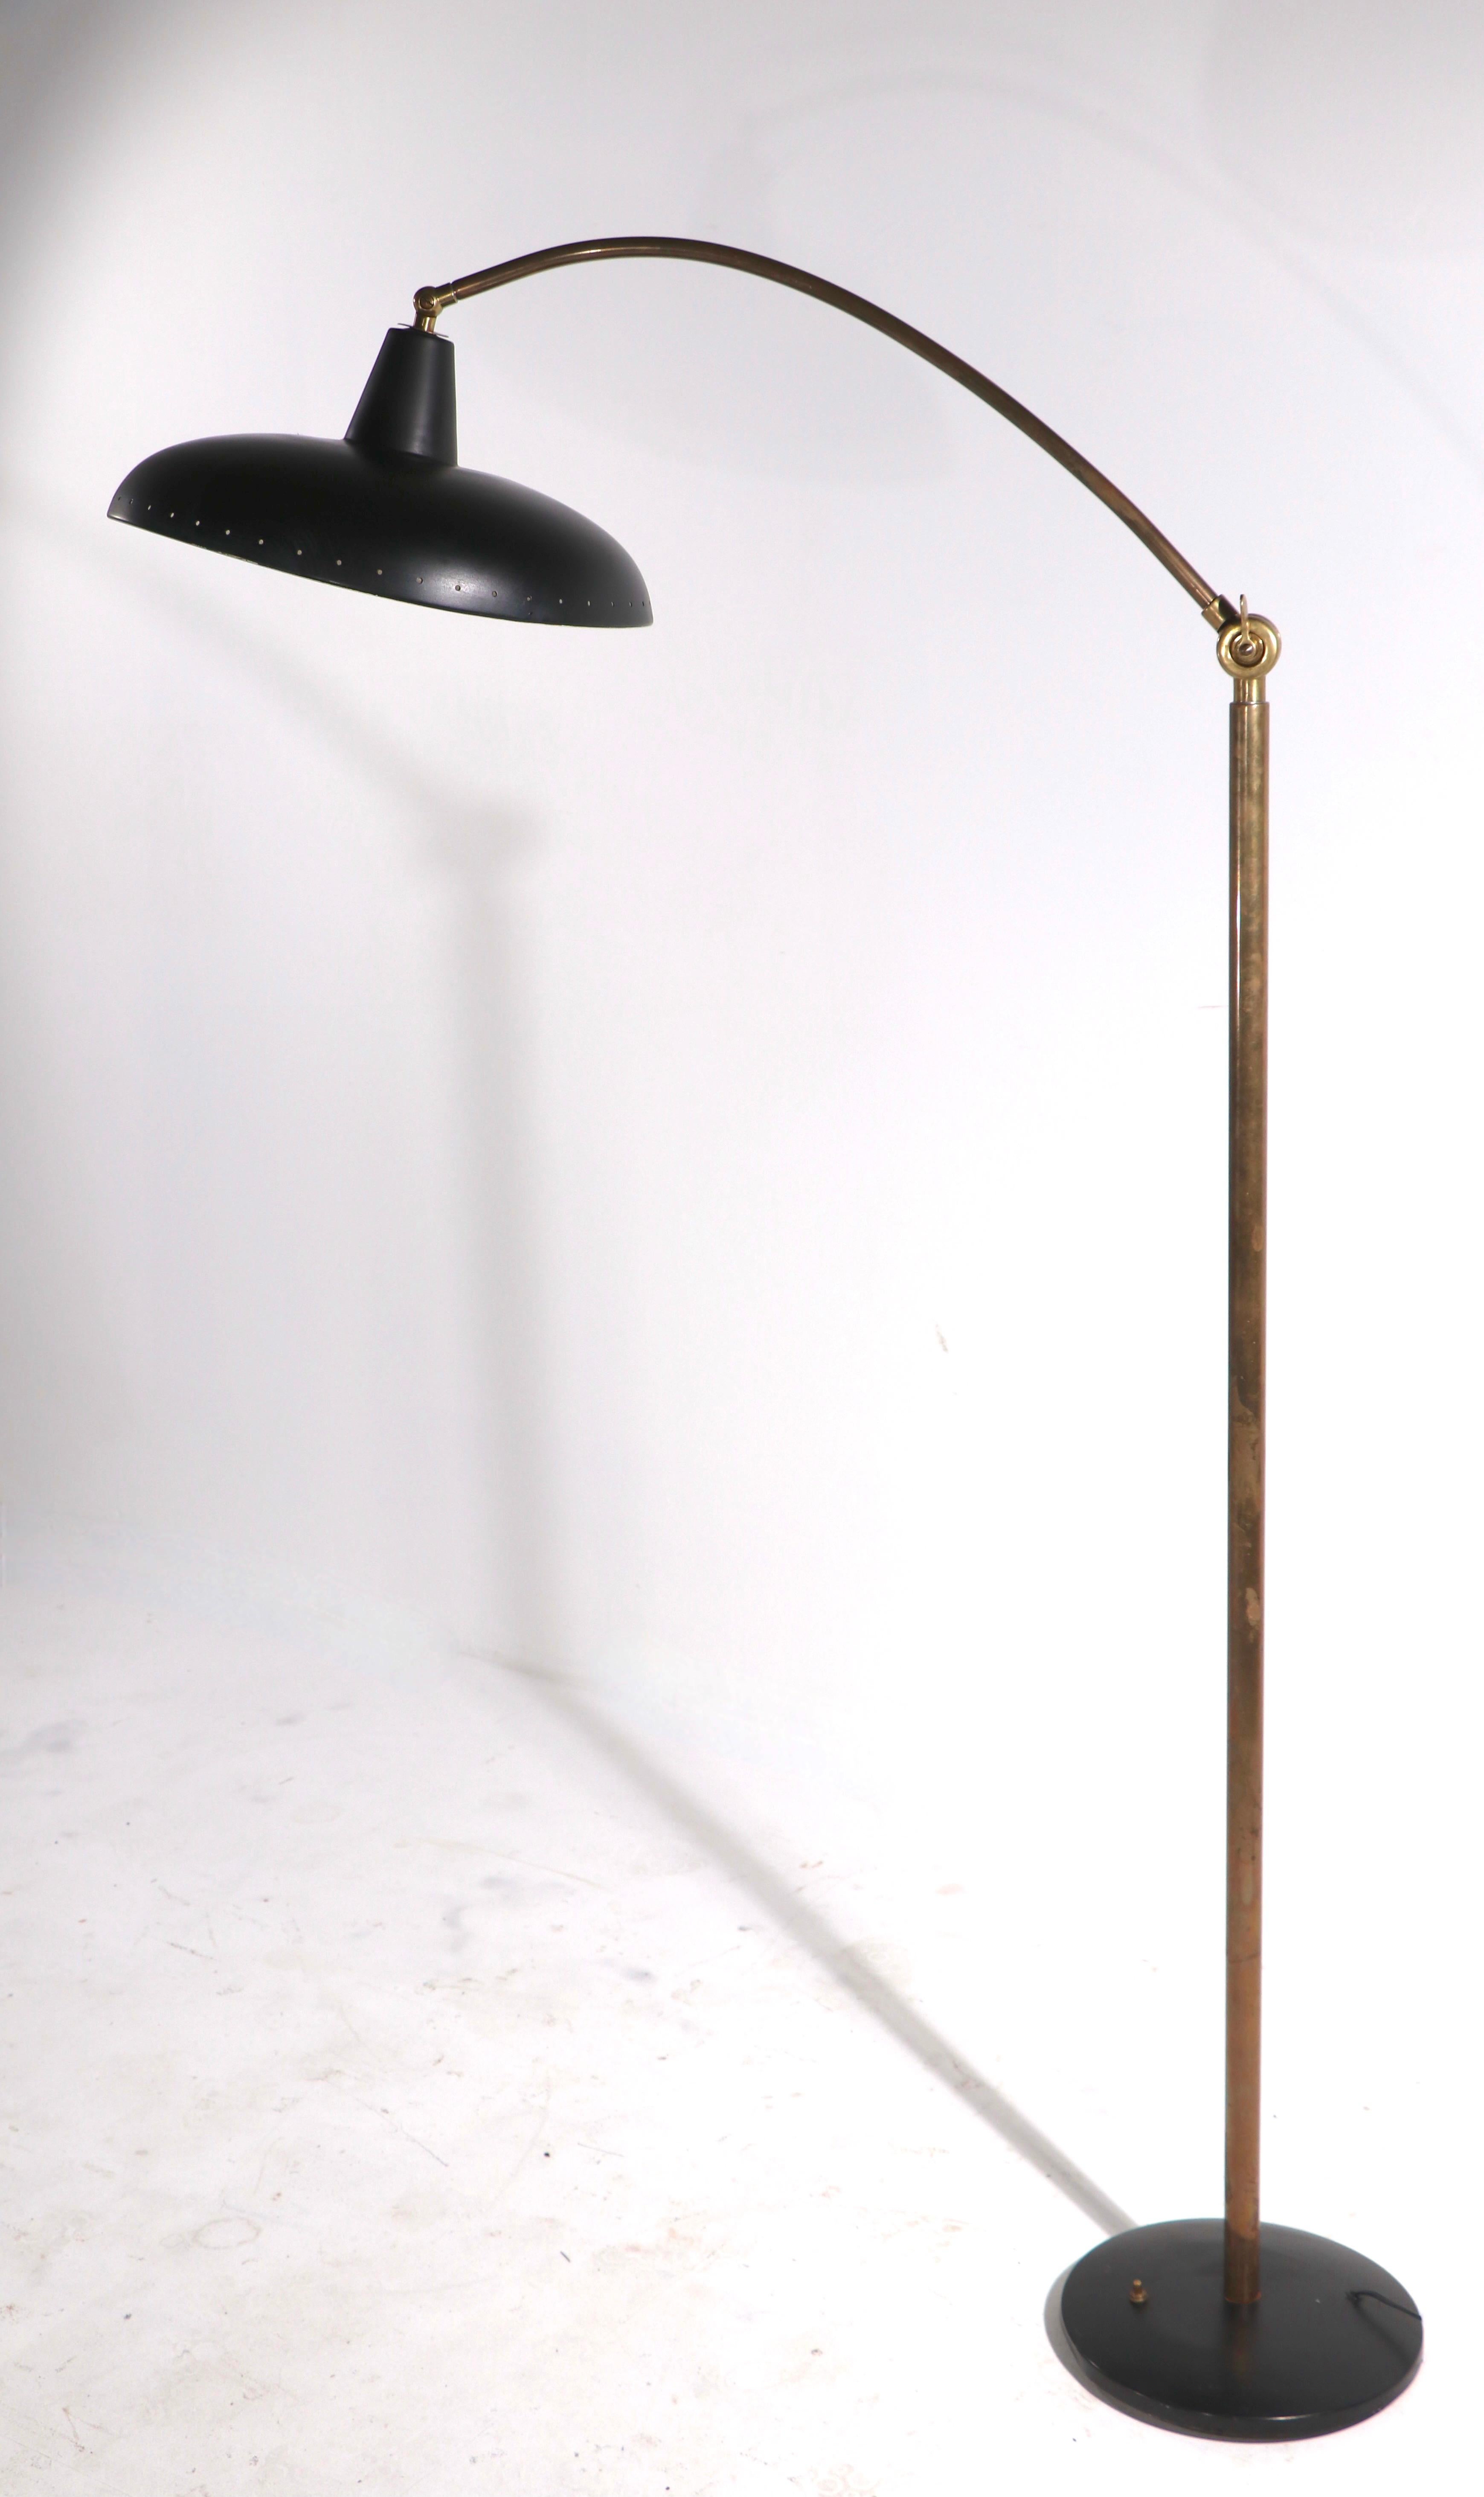 Well crafted mid century floor, reading lamp with black hood shade, and black base, with a brass vertical standard and arm. The lamp is adjustable in height ( L 48 in. H 67 in. ) the hood shade ( 13 in Dia ) tilts, to position the light exactly